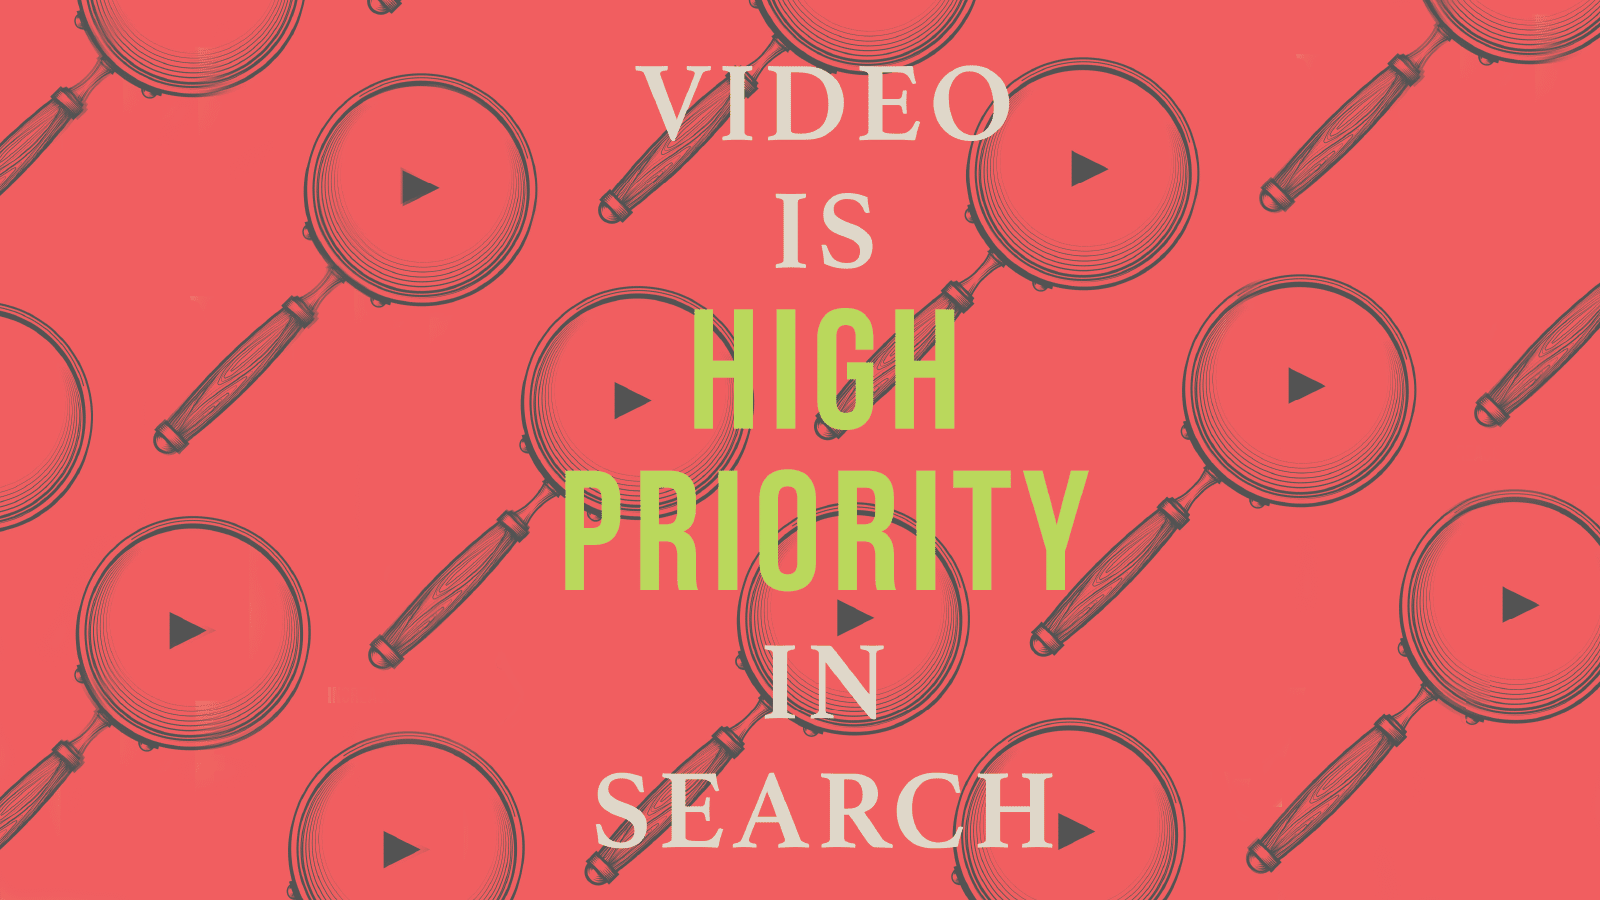 VideoPrioritySearch